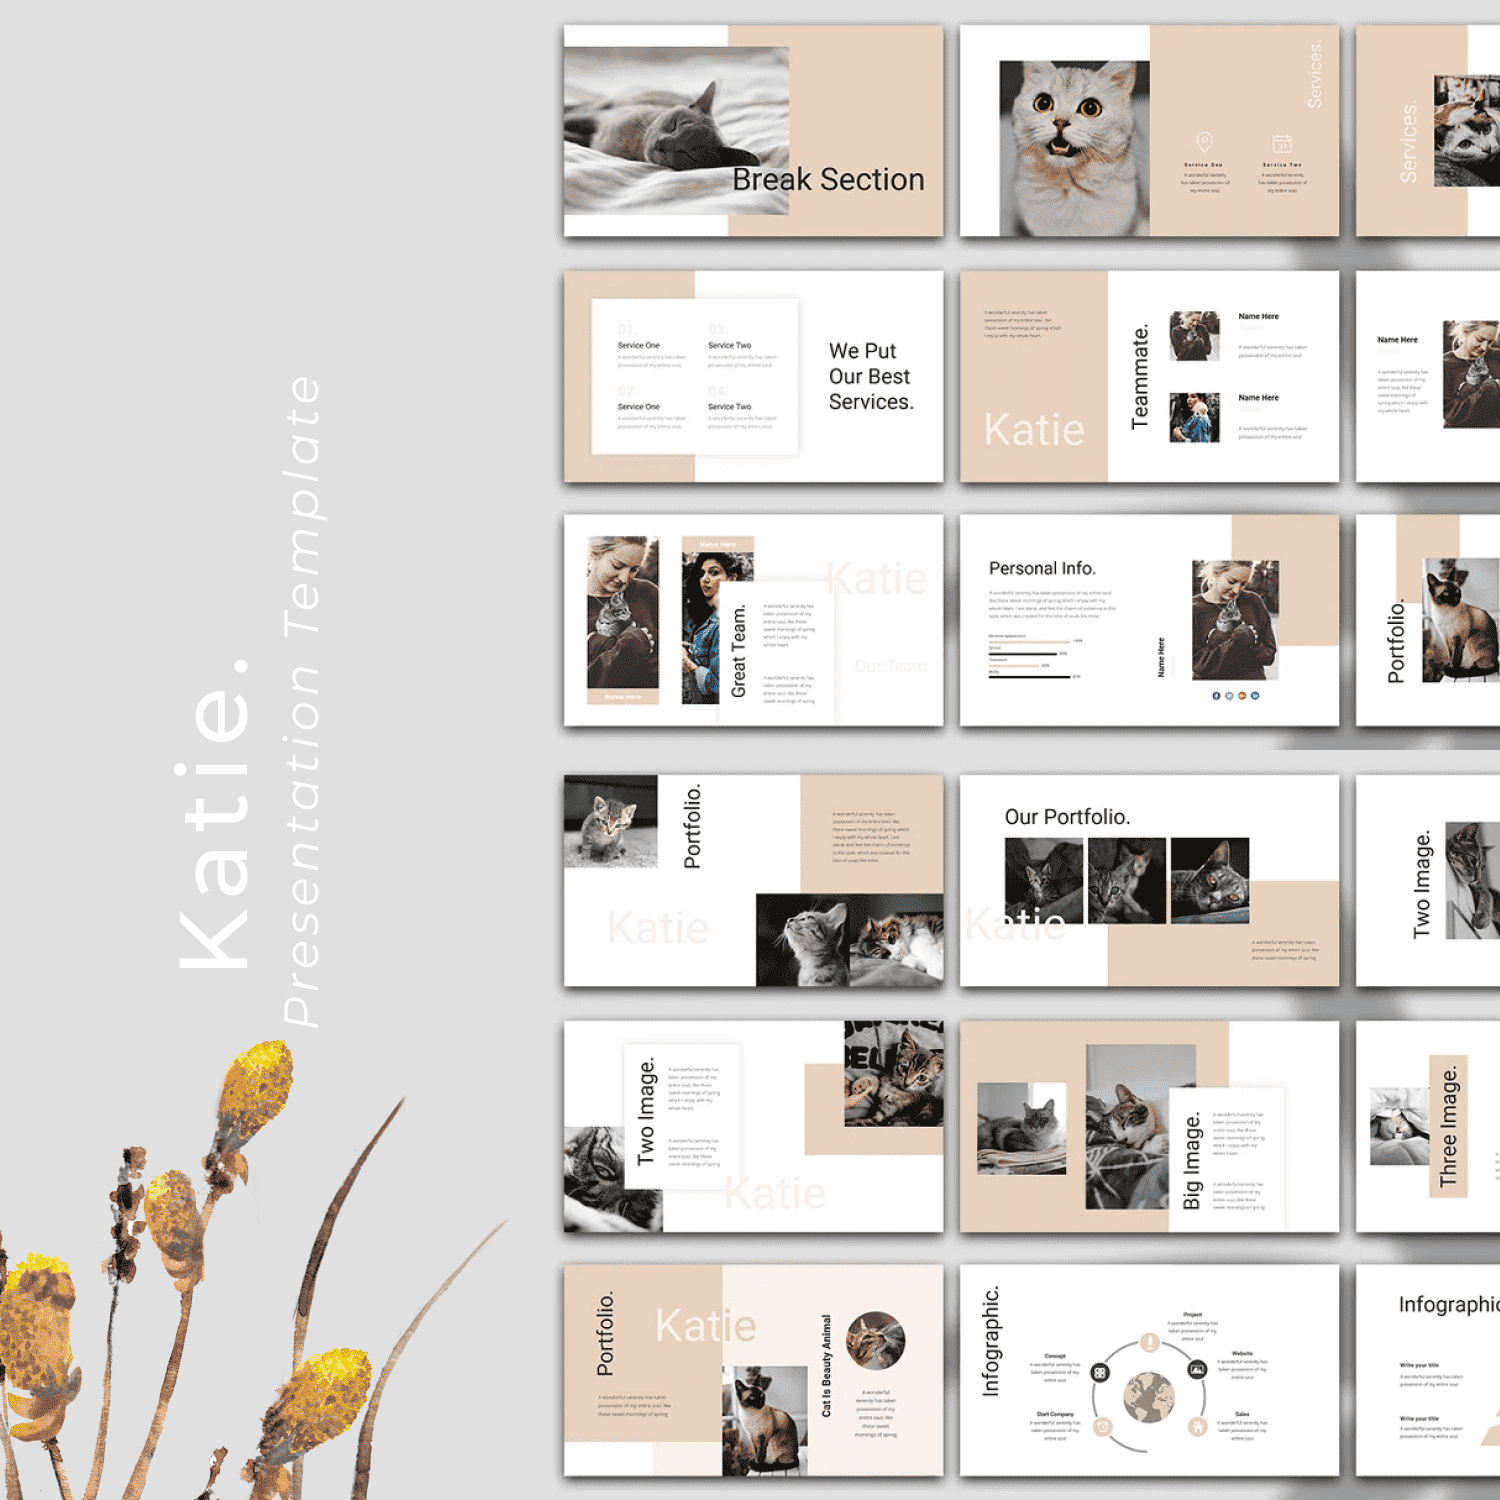 Katie. - Presentation Template - "We Put Our Best Services".